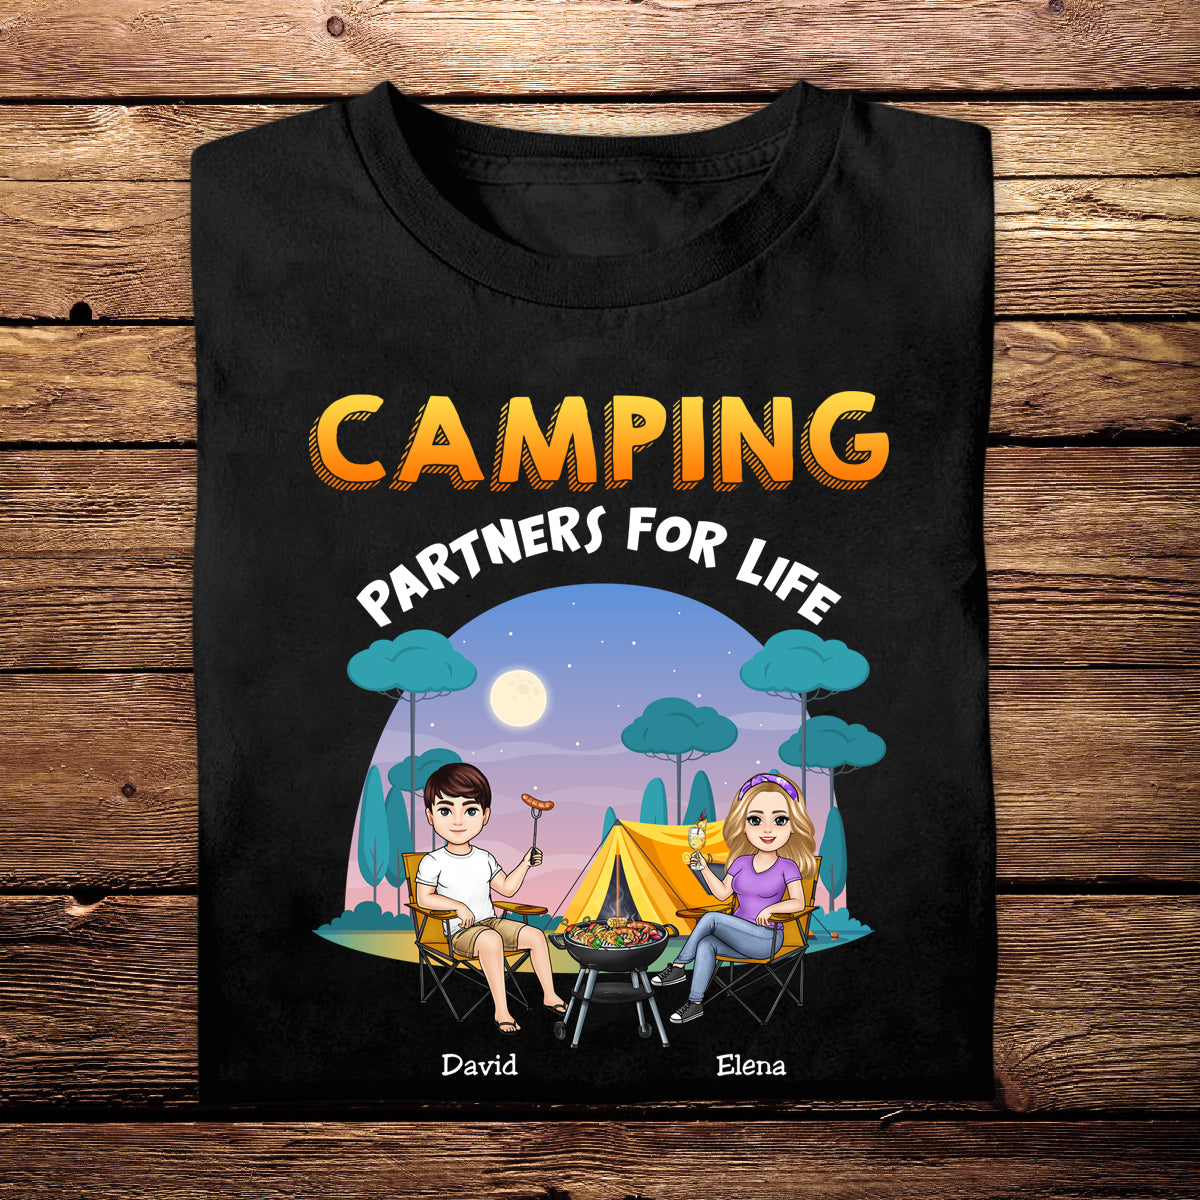 Camping Partner For Life - Personalized Appaprel - Gift For Couple, Camping, Summer Vacation